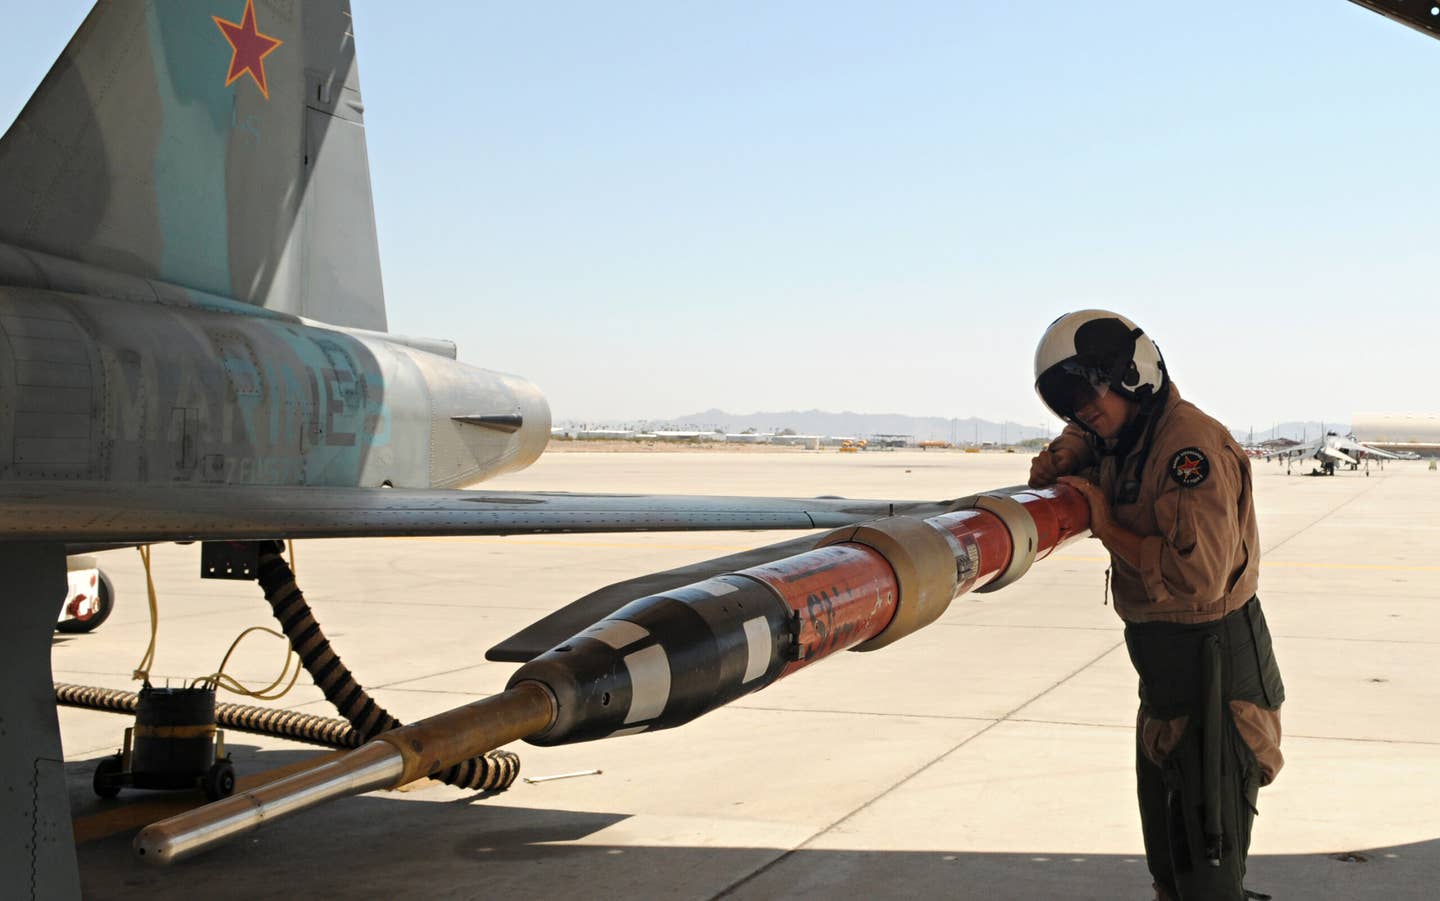 A pilot from Marine Fighter Training Squadron 401 checks the placement of a TCTS pod on an F-5E prior to takeoff at the Marine Corps Air Station Yuma, Arizona. <em>U.S. Marine Corps</em>